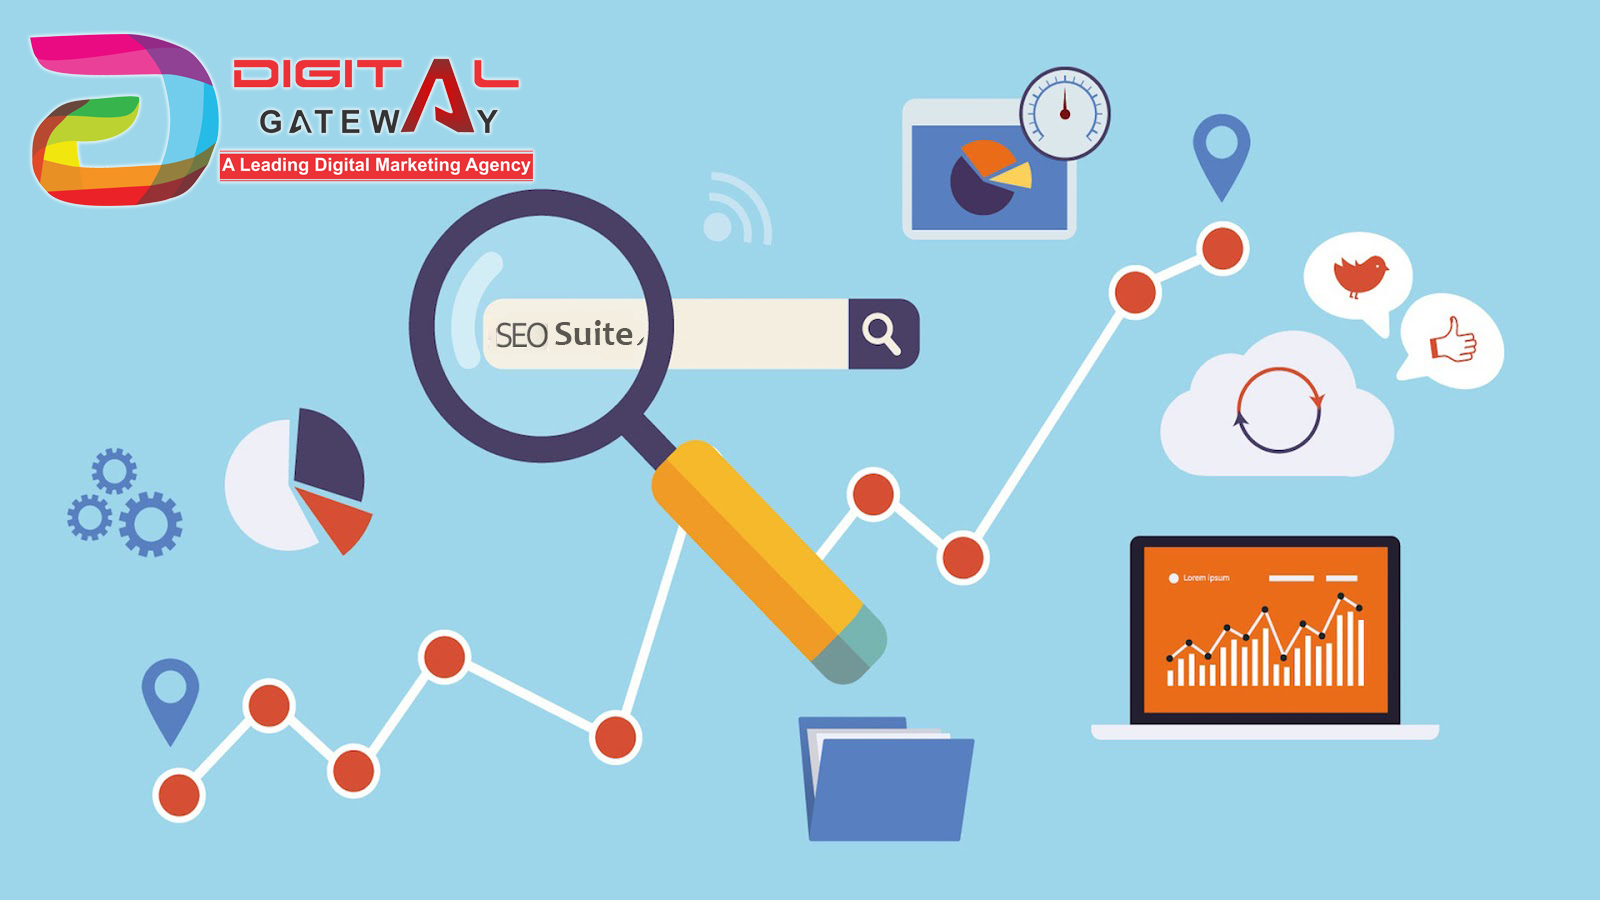 easiest SEO software, easiest SEO content writer software, best easiest SEO software, software for seo software, seo software, easiest SEO software agencies, best software, easiest SEO software online, software India, easiest SEO software in India, easiest SEO internet software online, easiest SEO software company, easiest SEO tools, easiest SEO software companies